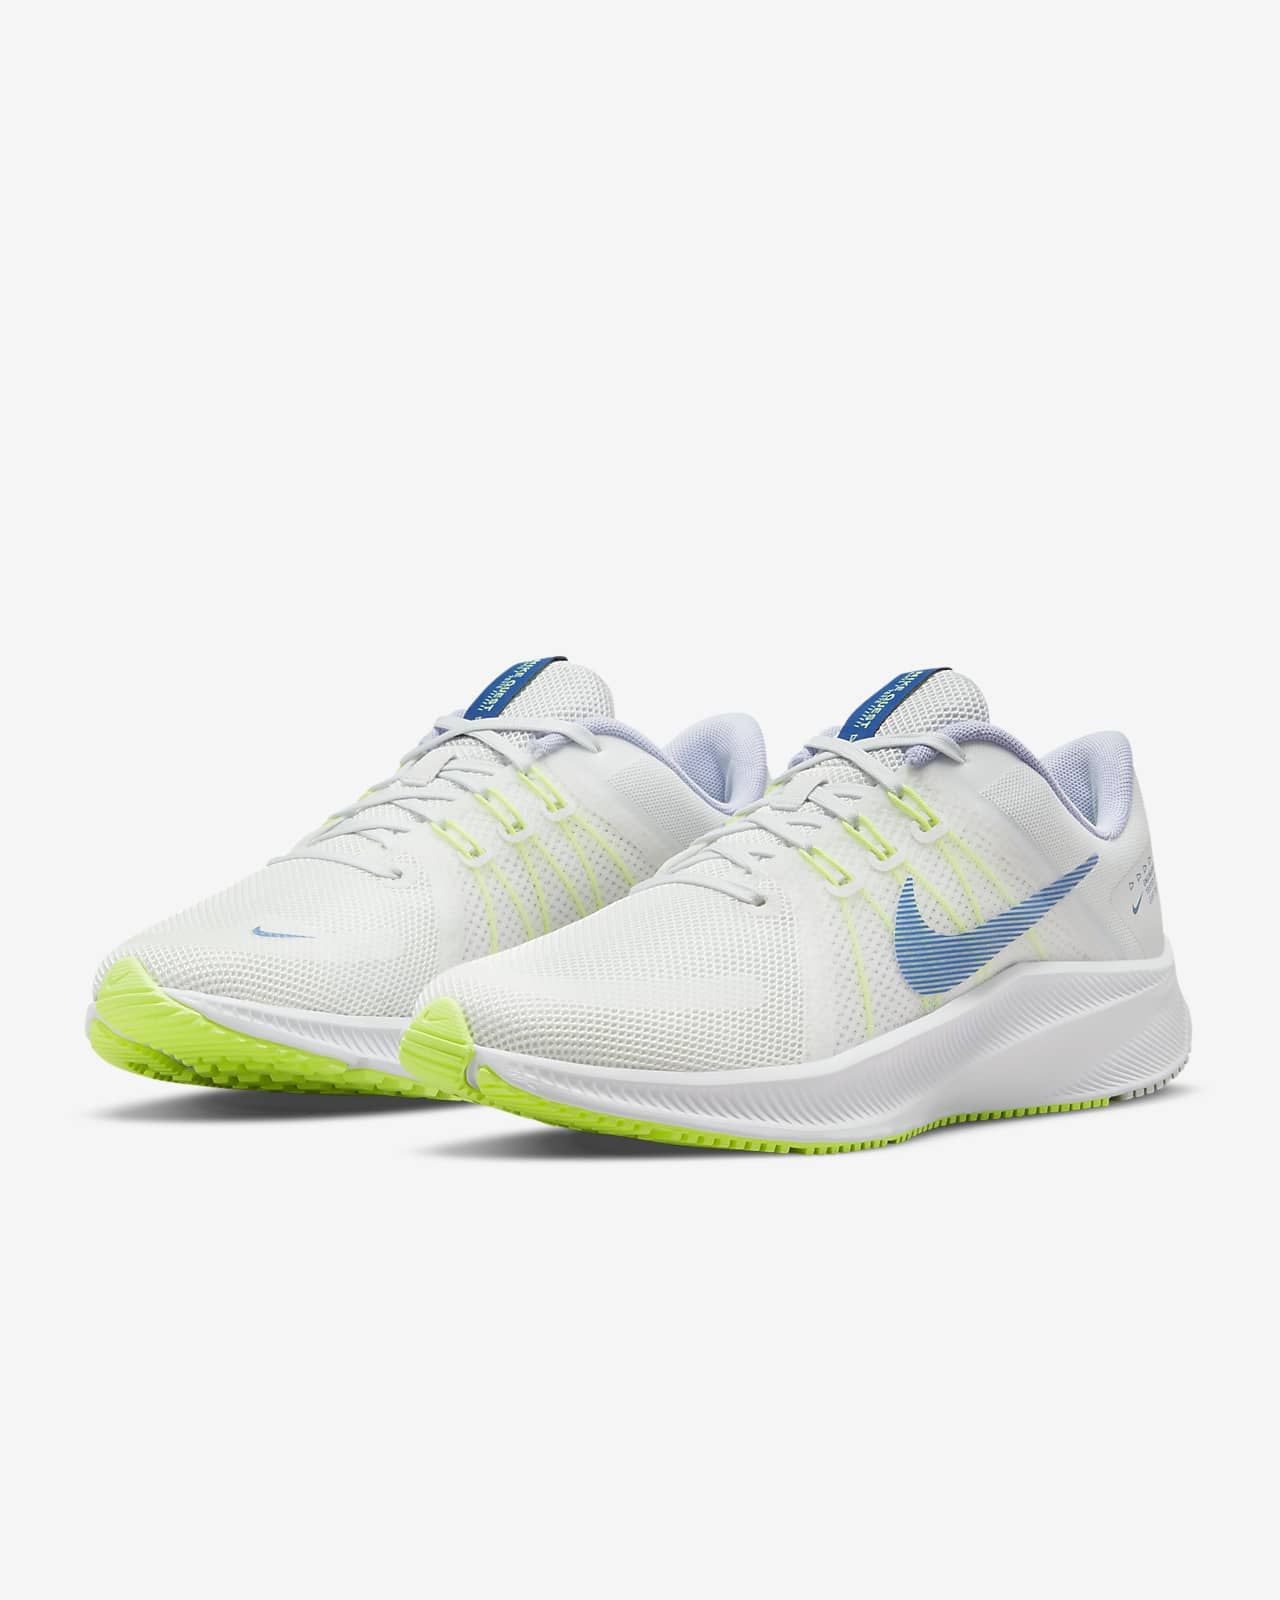 Nike Quest 4 Women's Road Running Shoes.